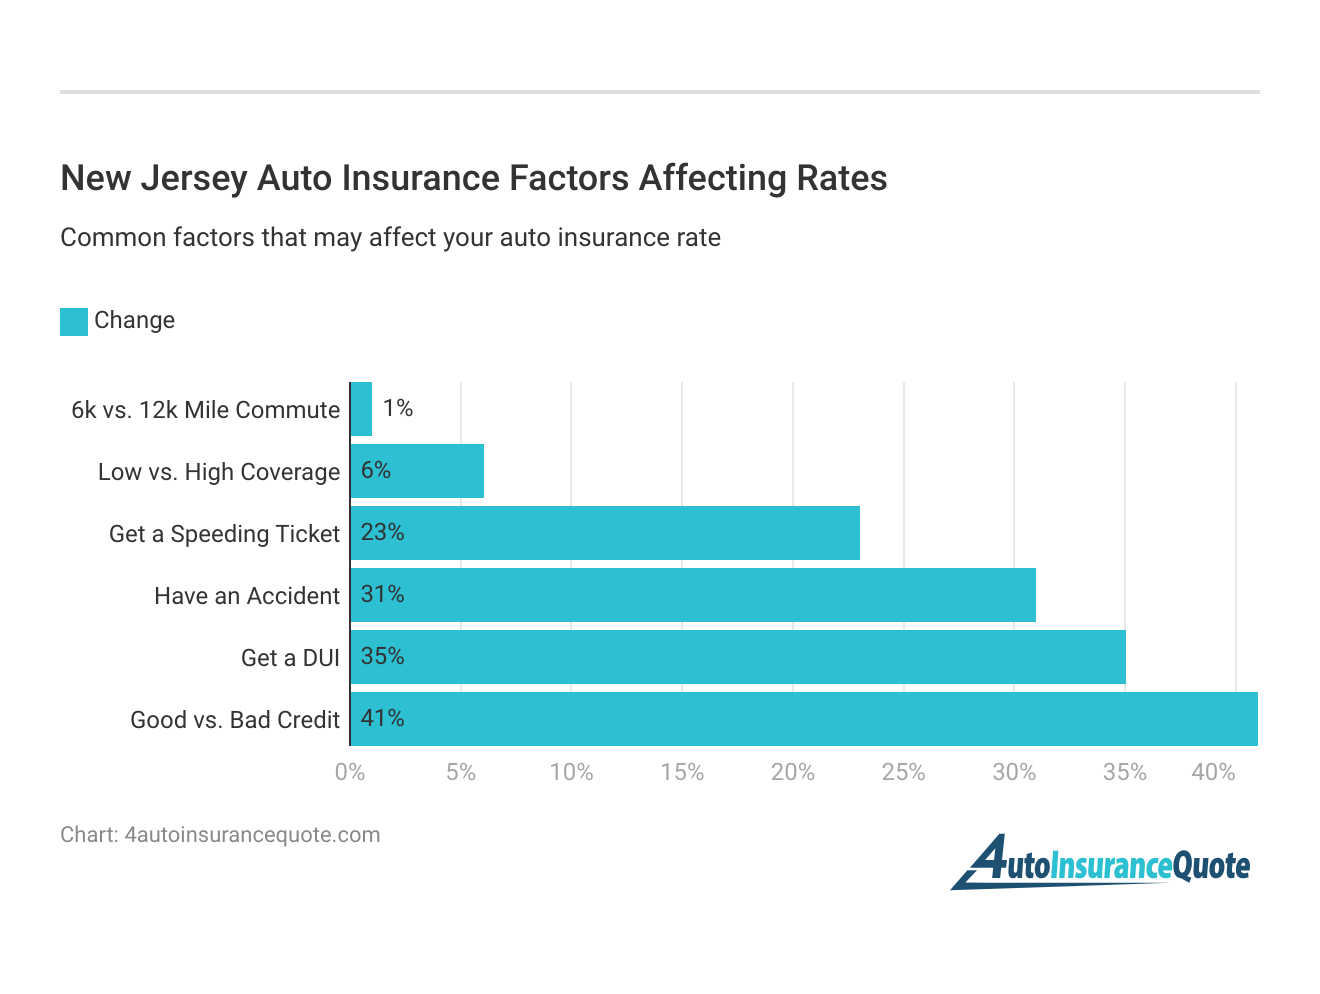 <h3>New Jersey Auto Insurance Factors Affecting Rates</h3>